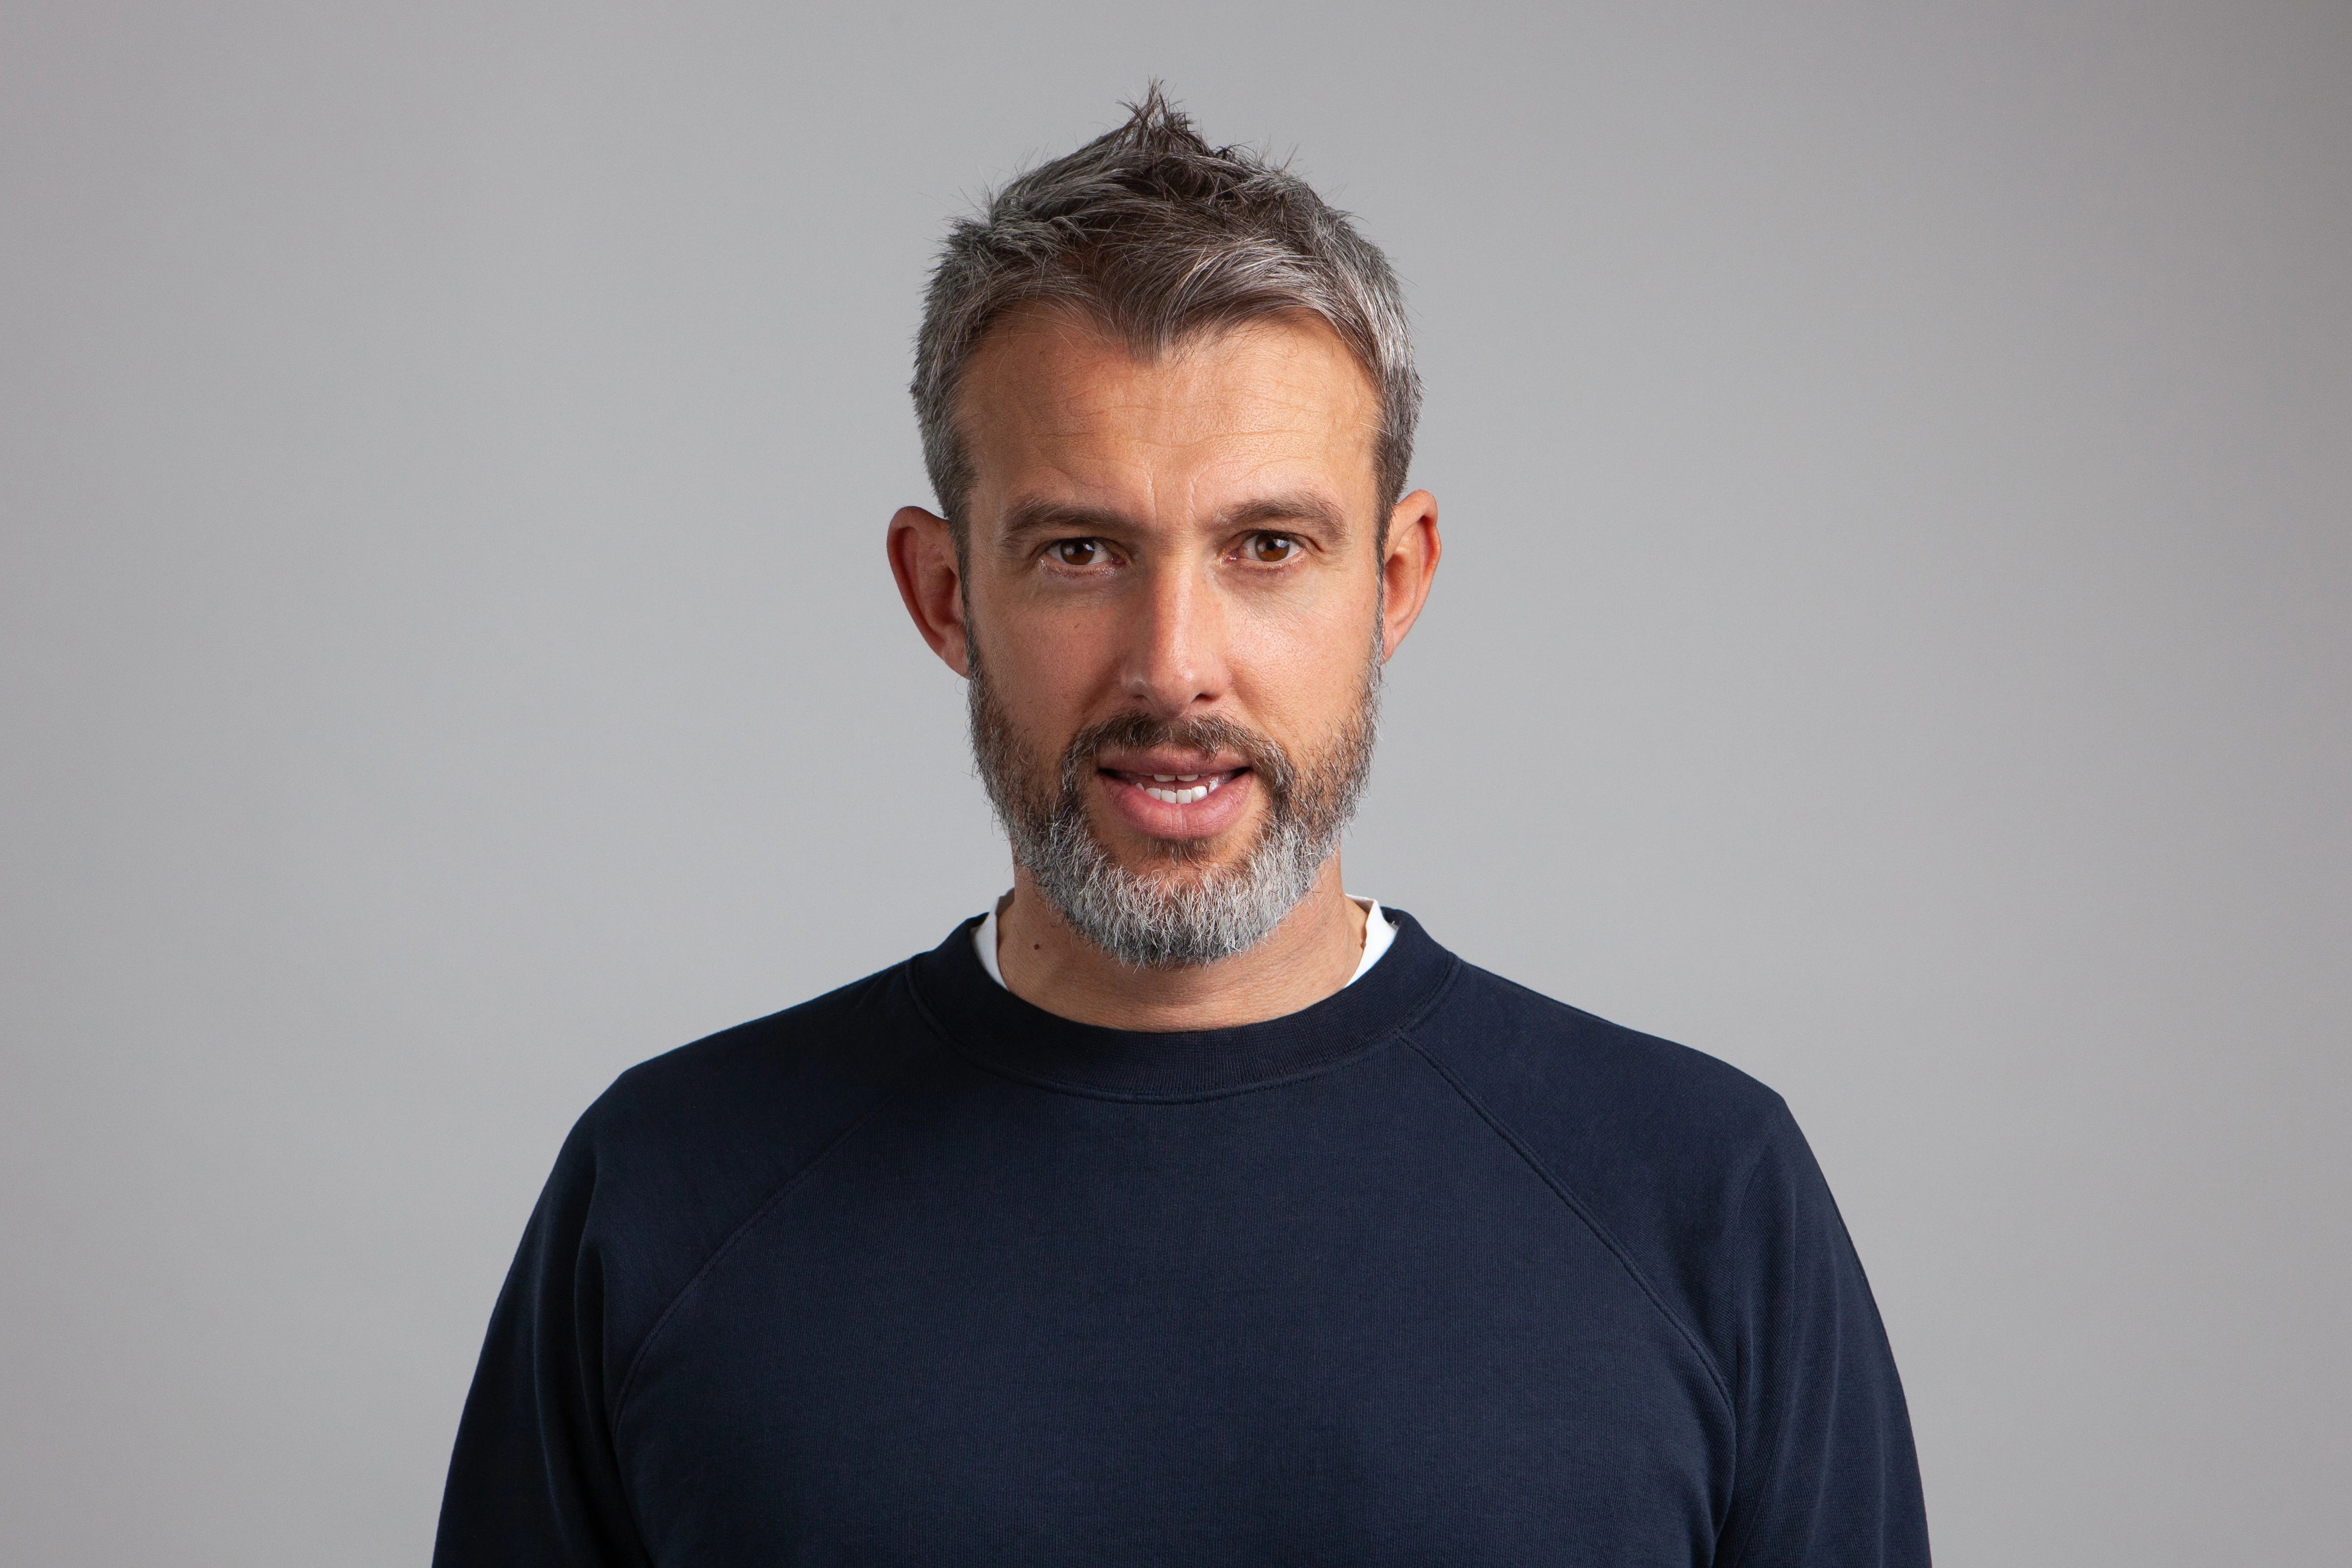 Richard Prime, co-CEO and co-Founder of Sonovate